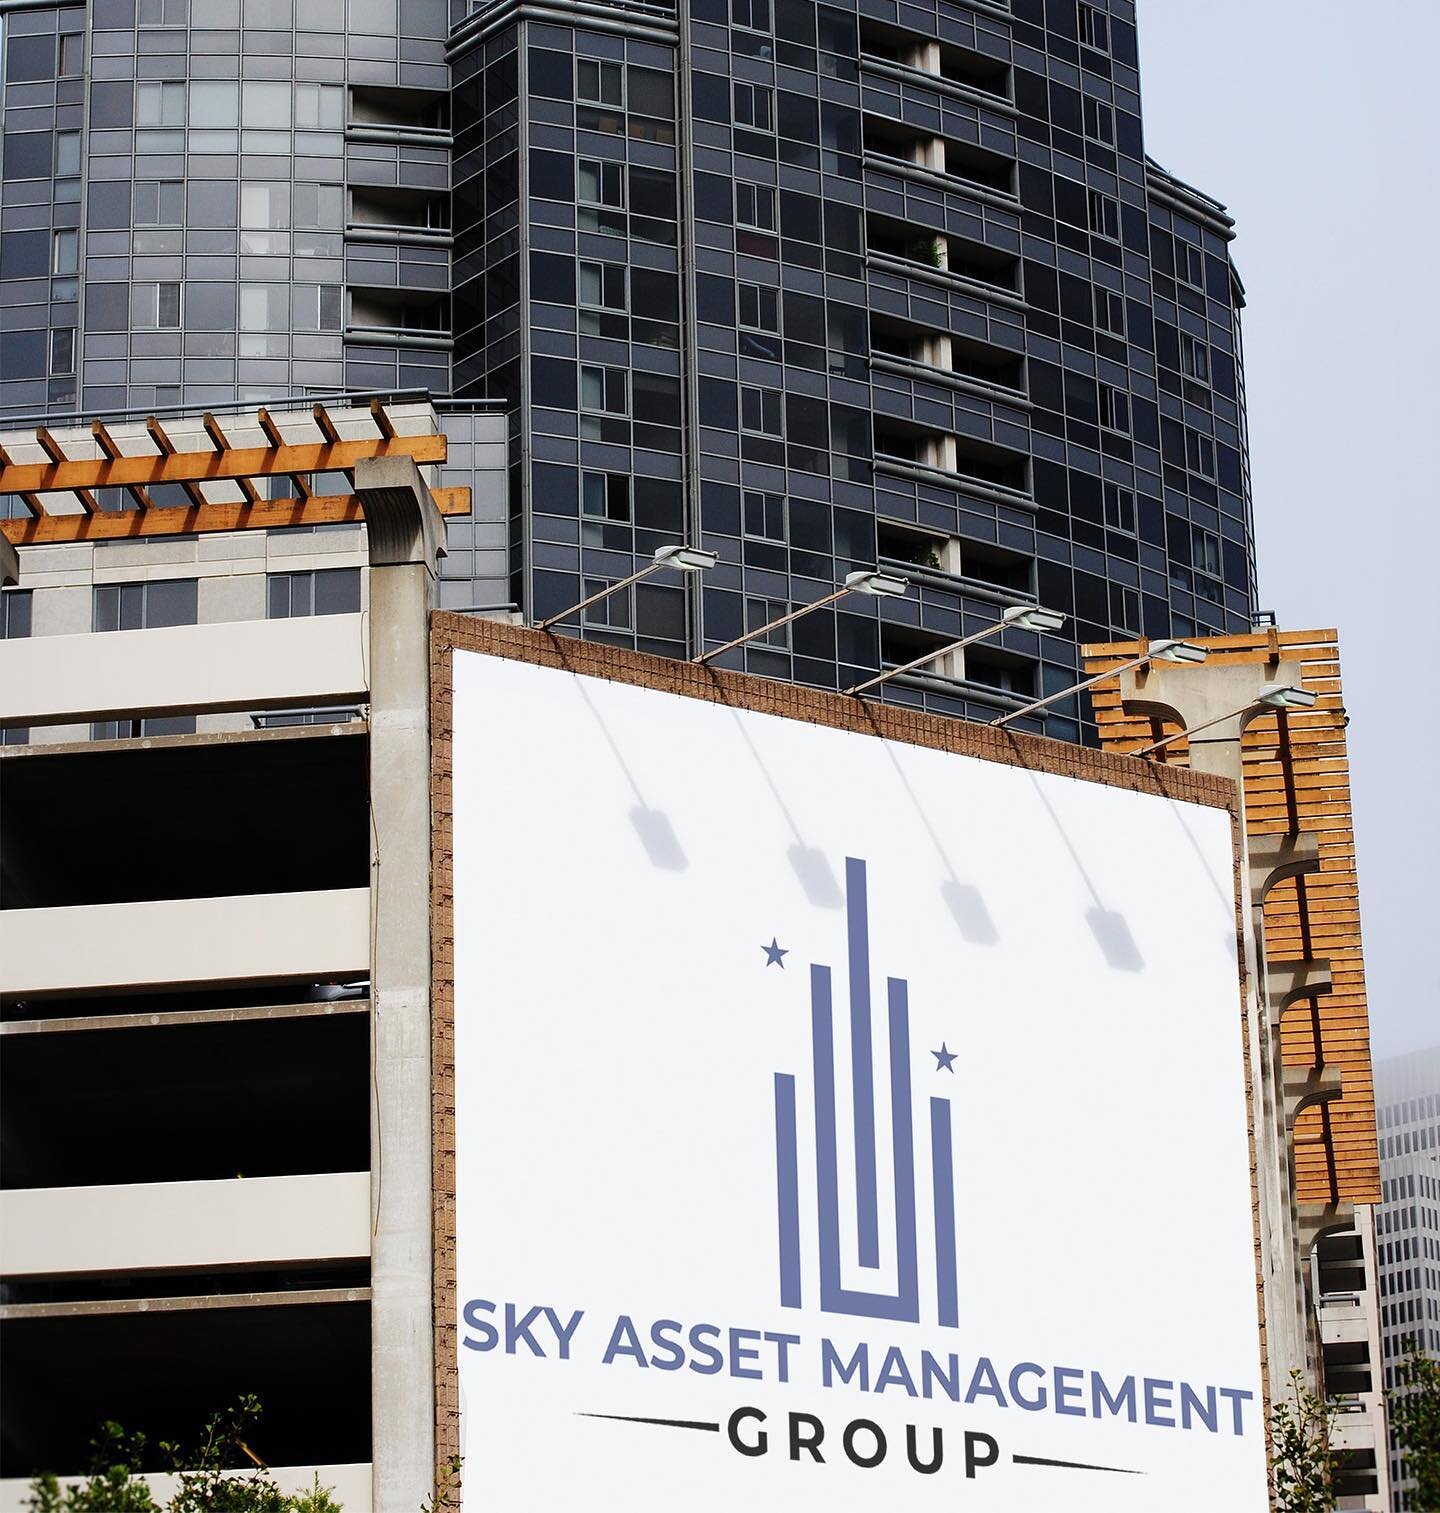 Working with the right property management company can mean the difference between a thriving rental business and the possibility of foreclosure. At Sky Asset Management Group we pride ourselves on top of the line, full service property management. C